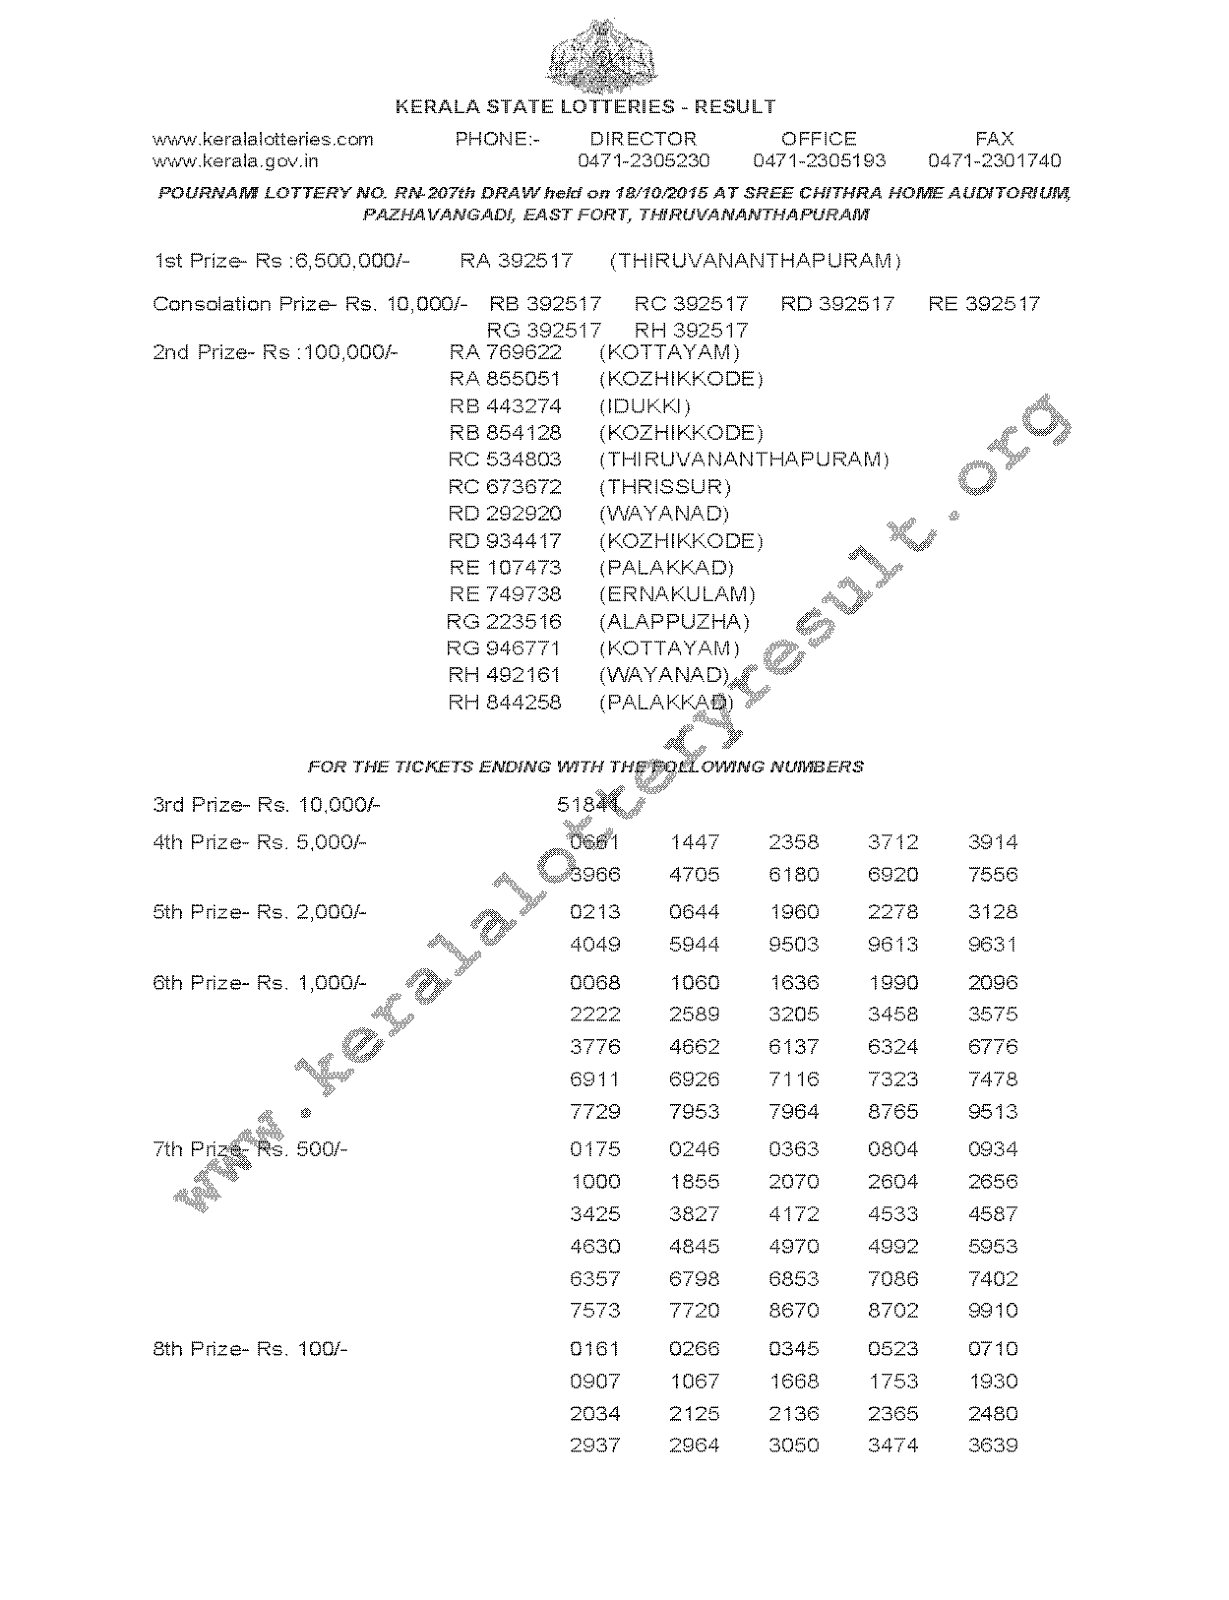 POURNAMI Lottery RN 207 Result 18-10-2015